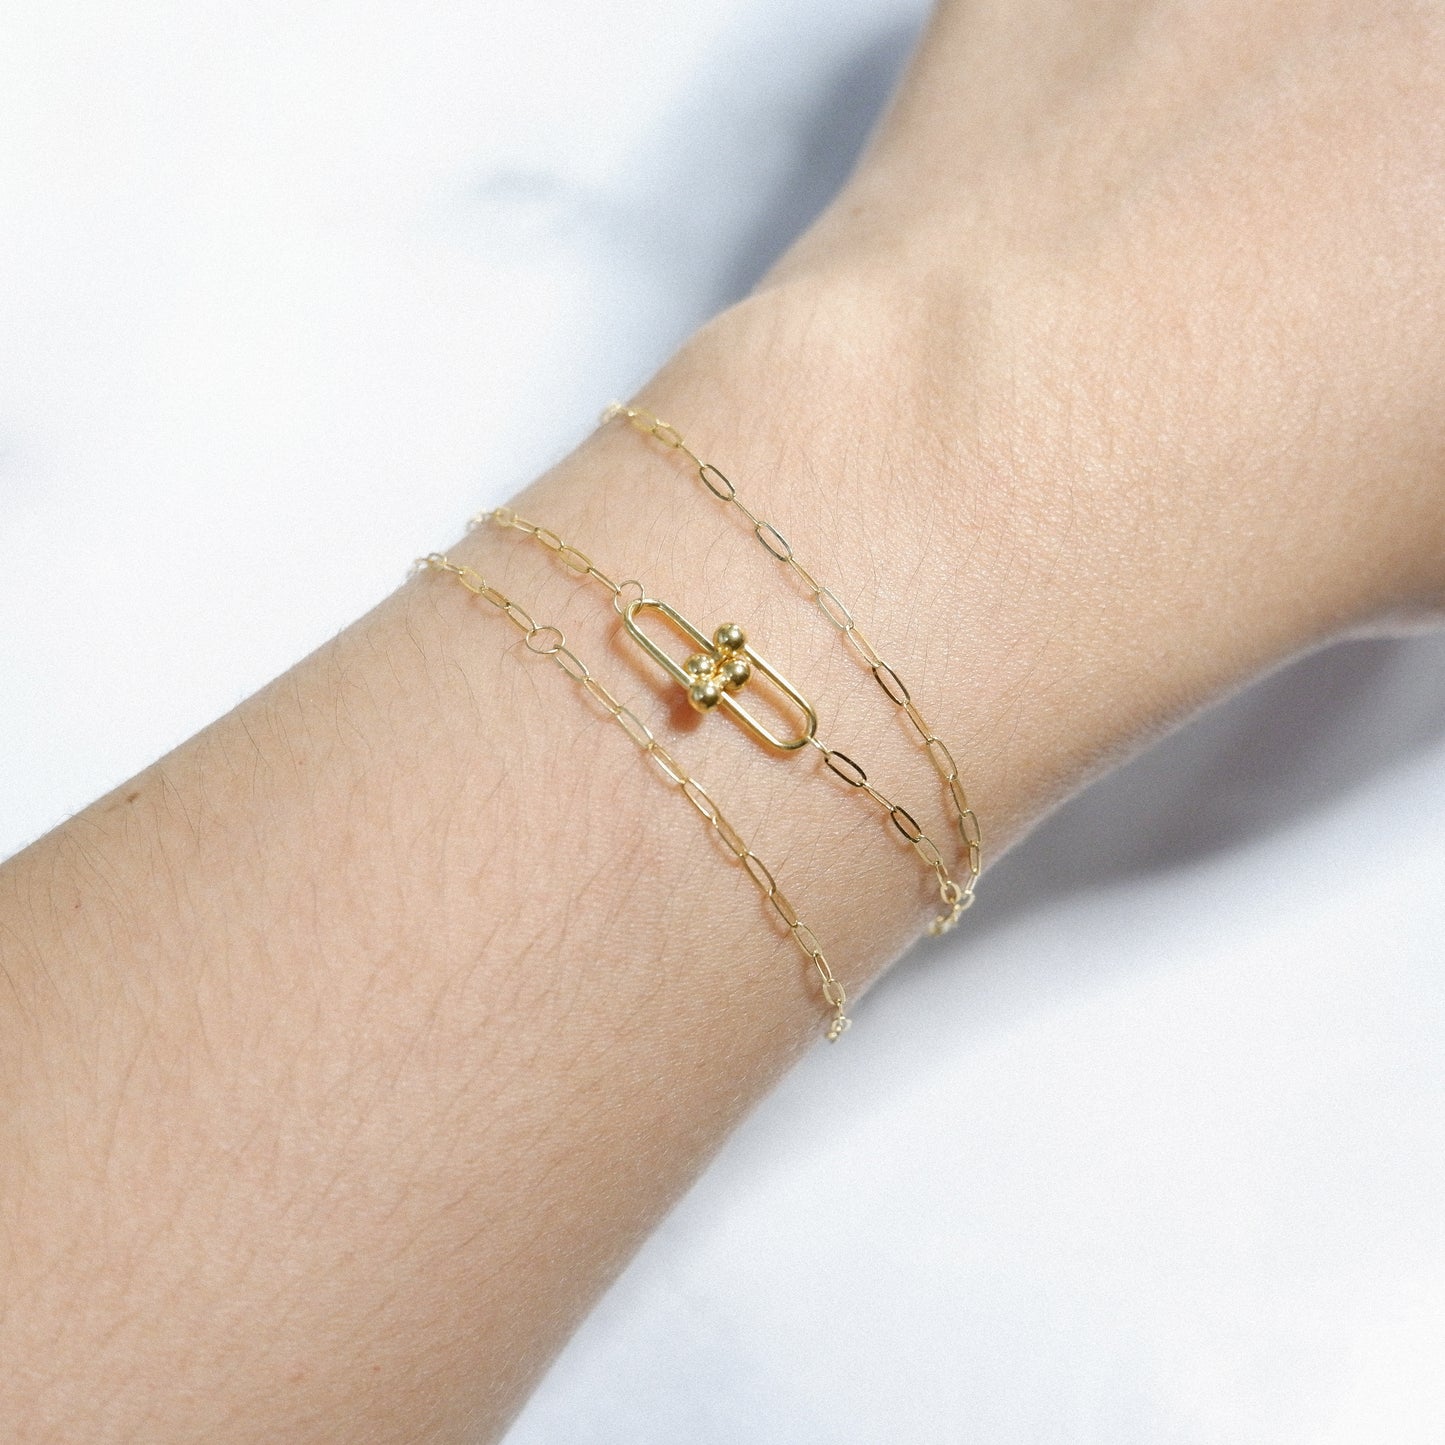 The Hardware Necklace & Bracelet in Solid Gold